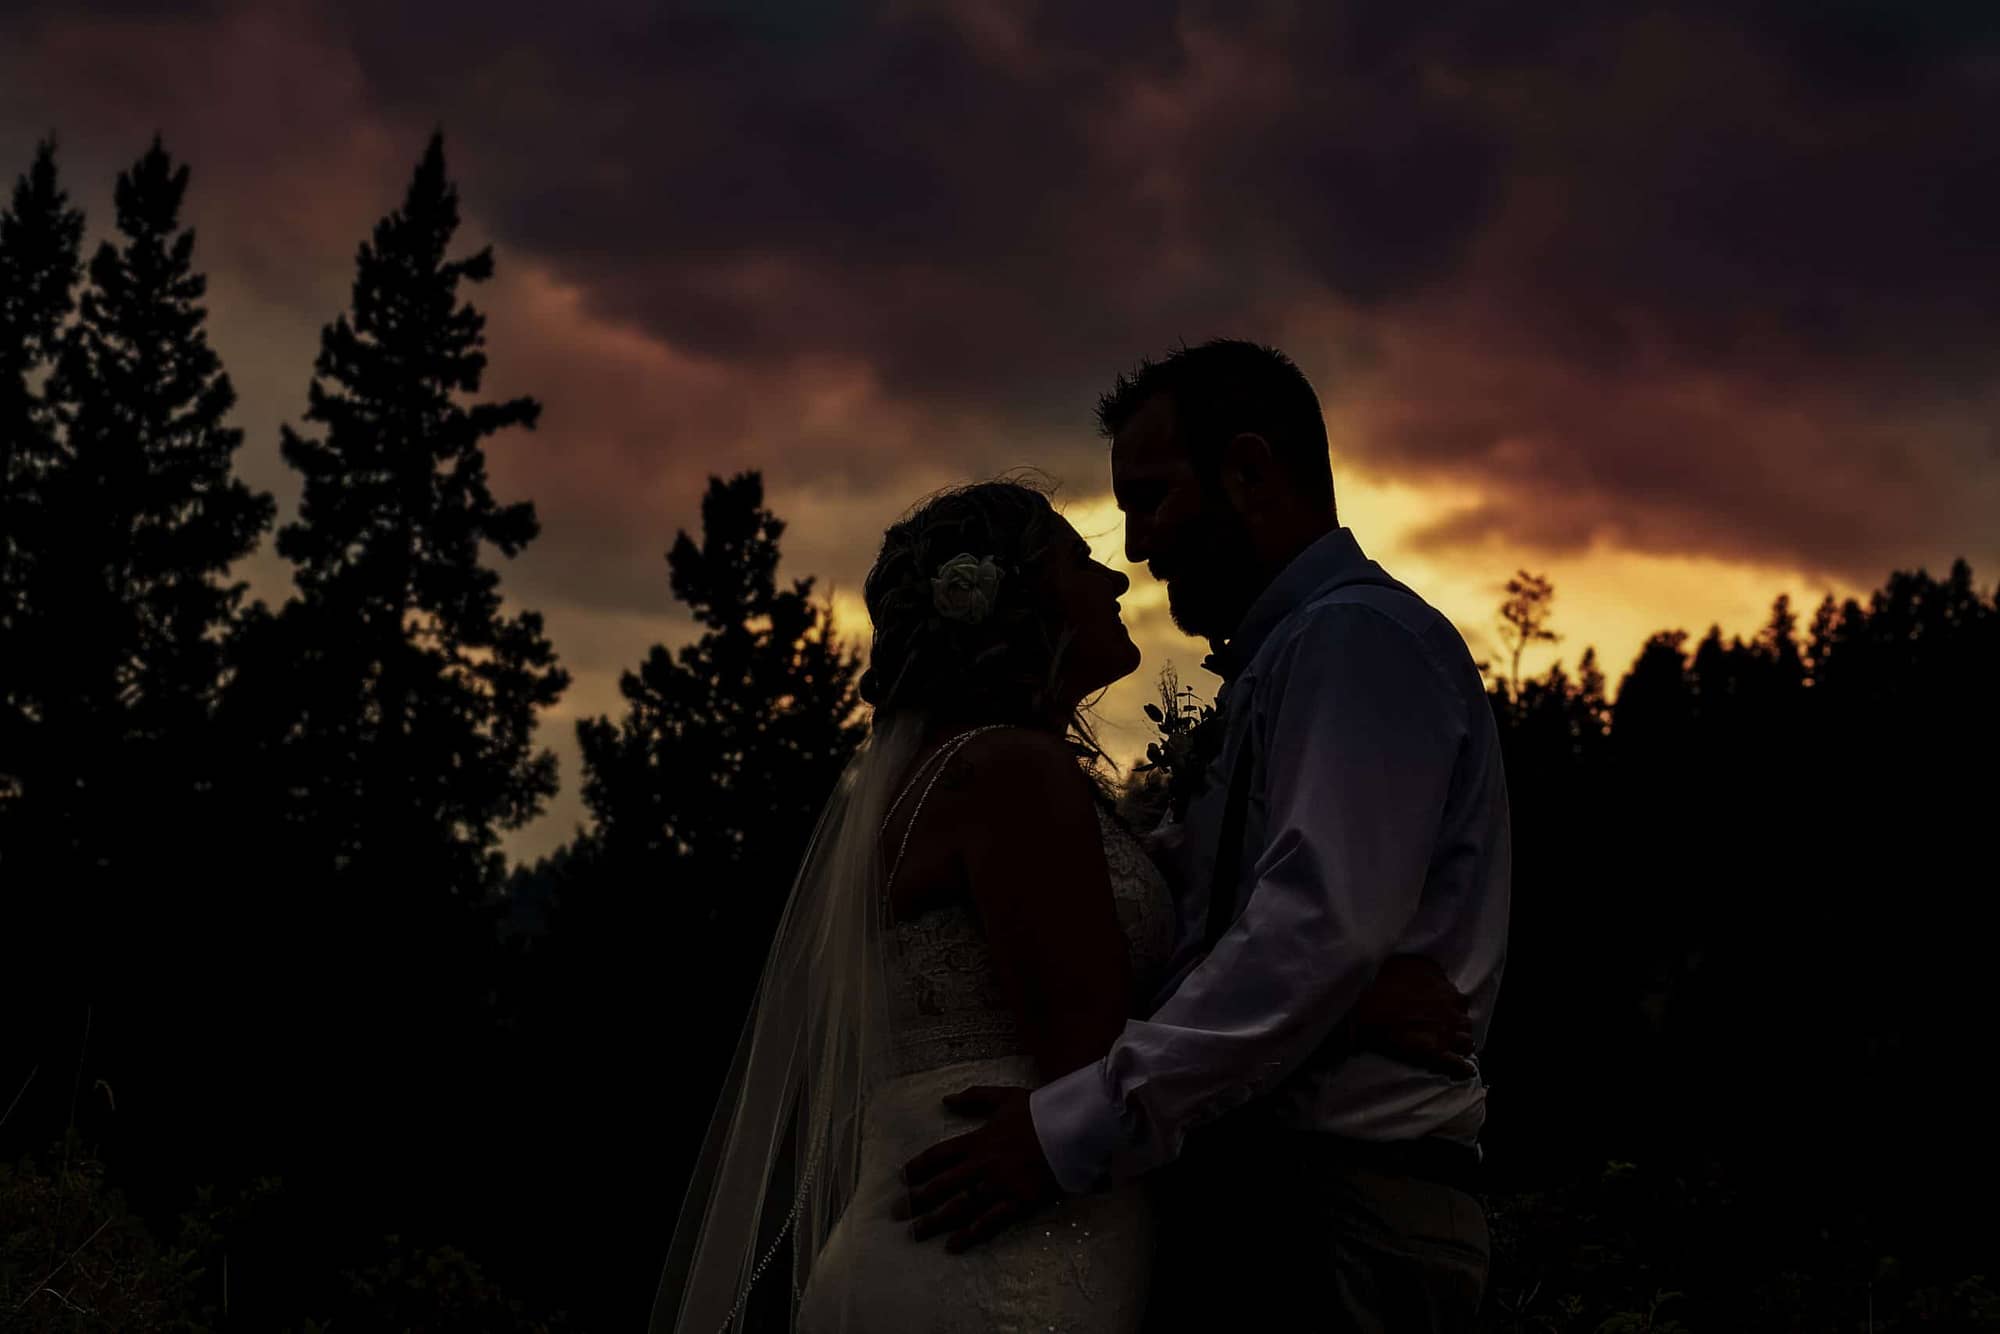 silhouette of wedding couple against sunset |Evening portraits at your wedding